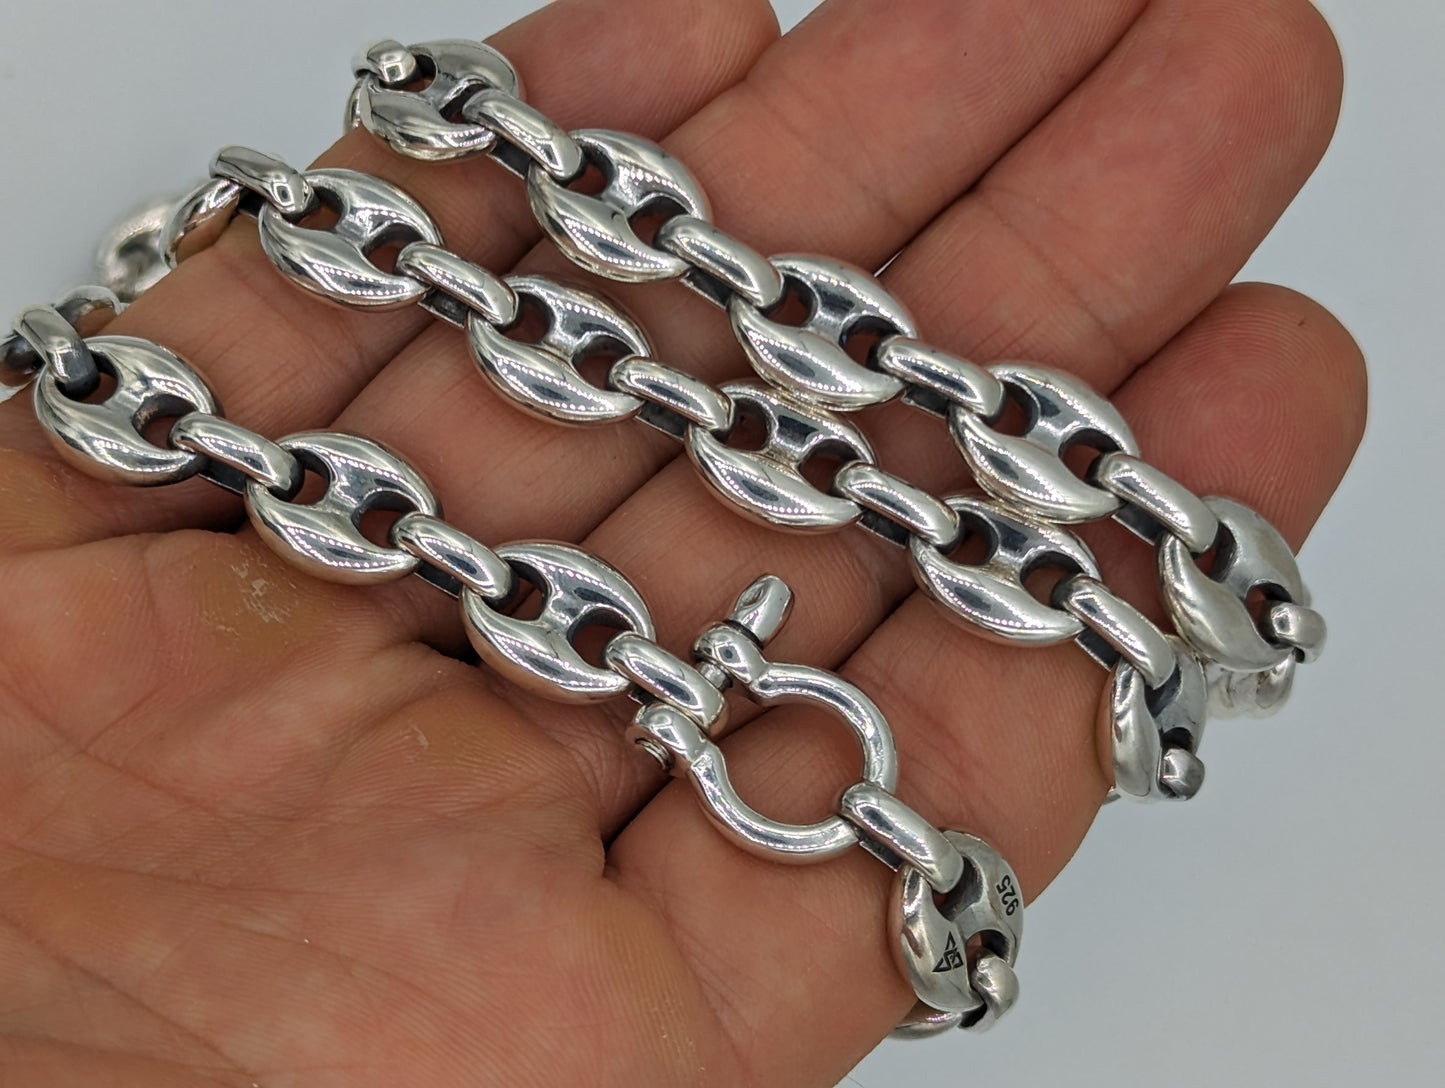 PL23 - 12mm Puffed Mariner Link Necklace